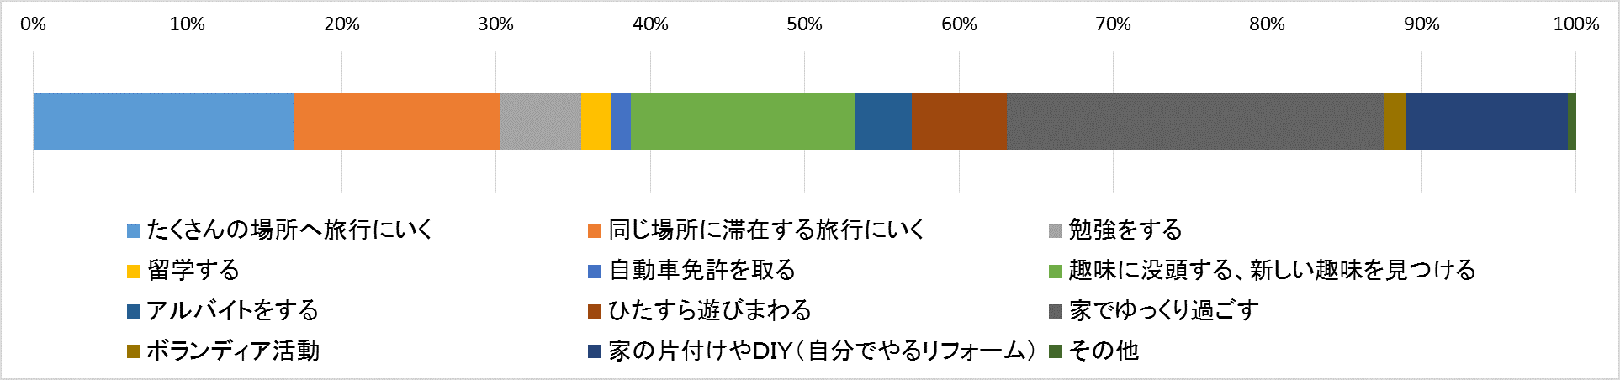 201808-15-fig-03.png